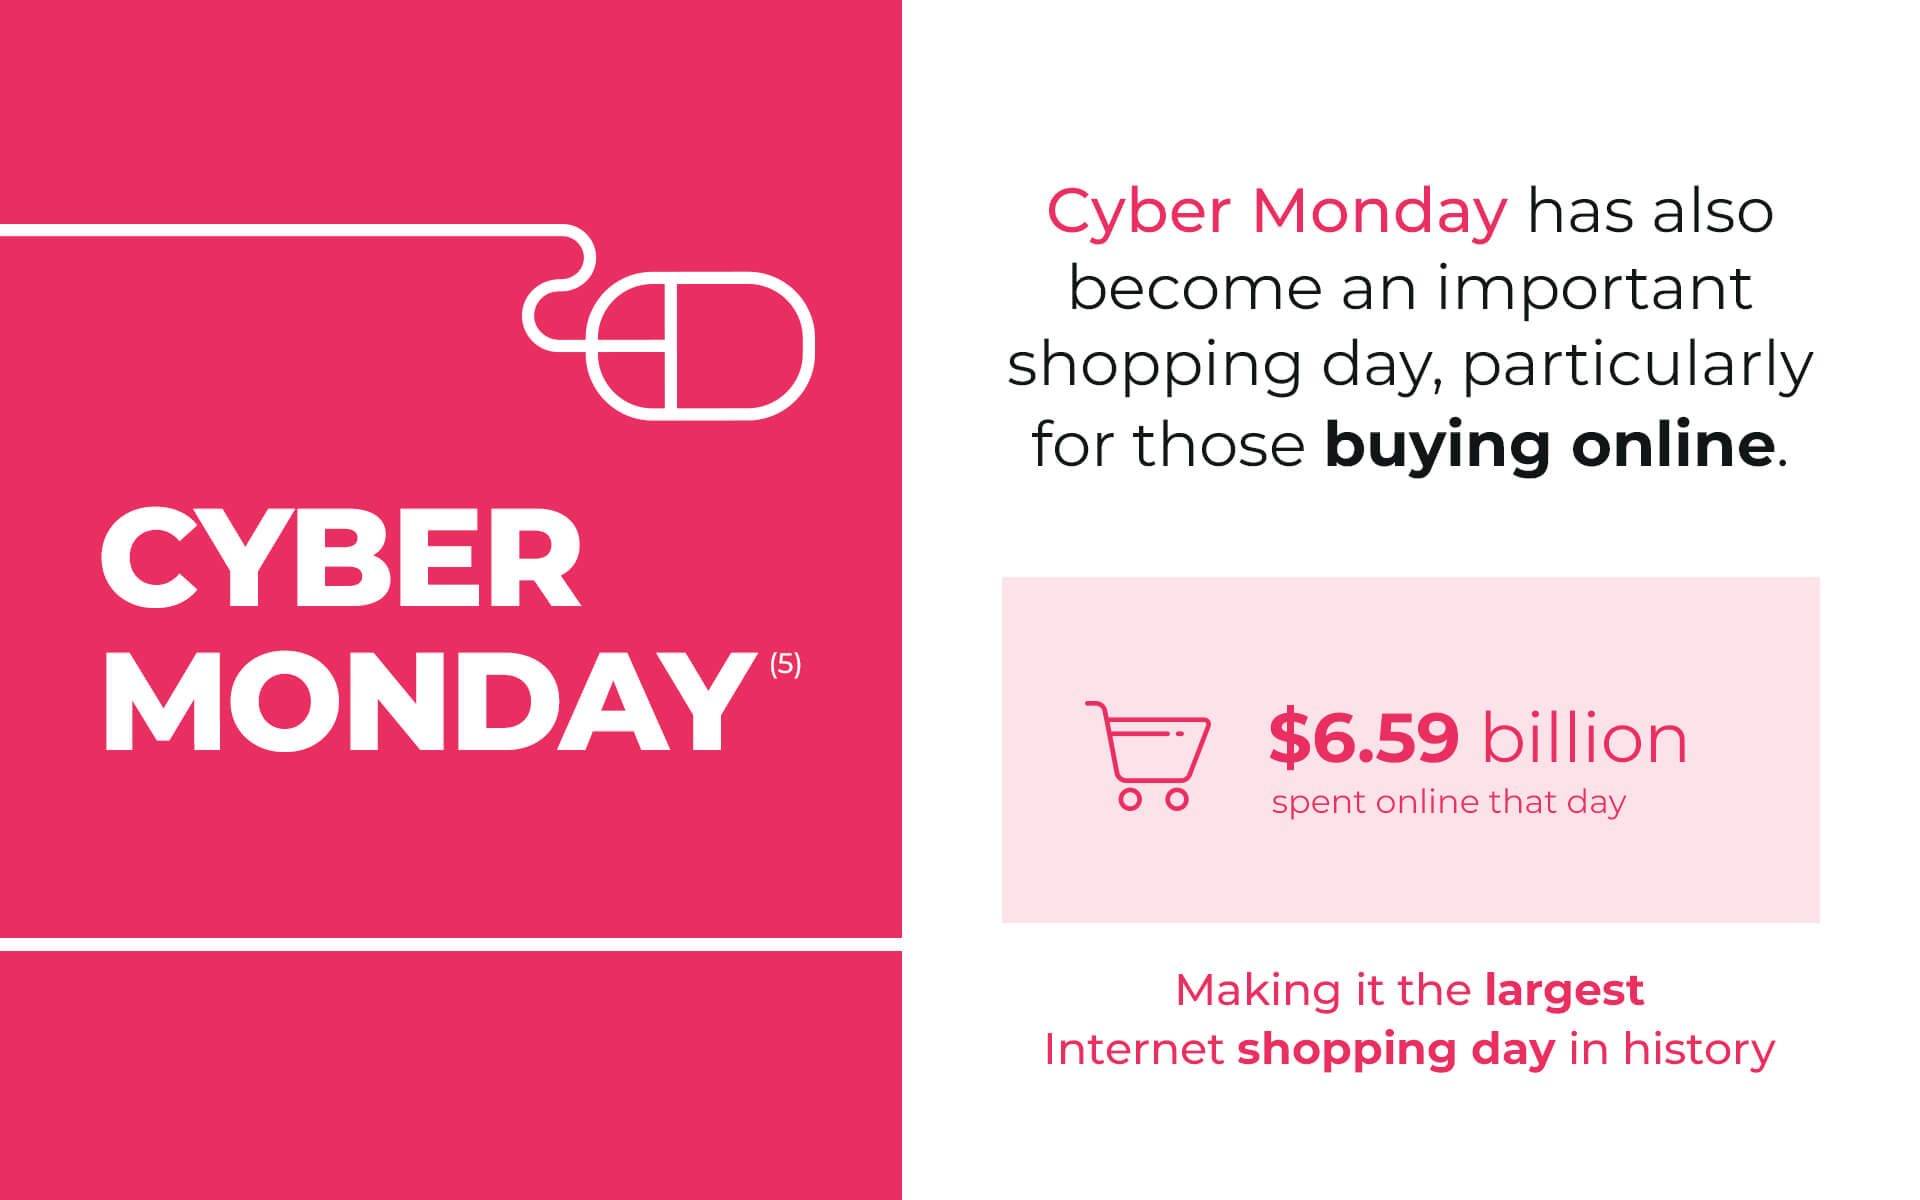 CYBER MONDAY HAS ALSO BECOME AN IMPORTANT SHOPPING DAY, PARTICULARLY FOR THOSE BUYING ONLINE. $6,59 BILLION SPENT ONLINE THAT DAY.